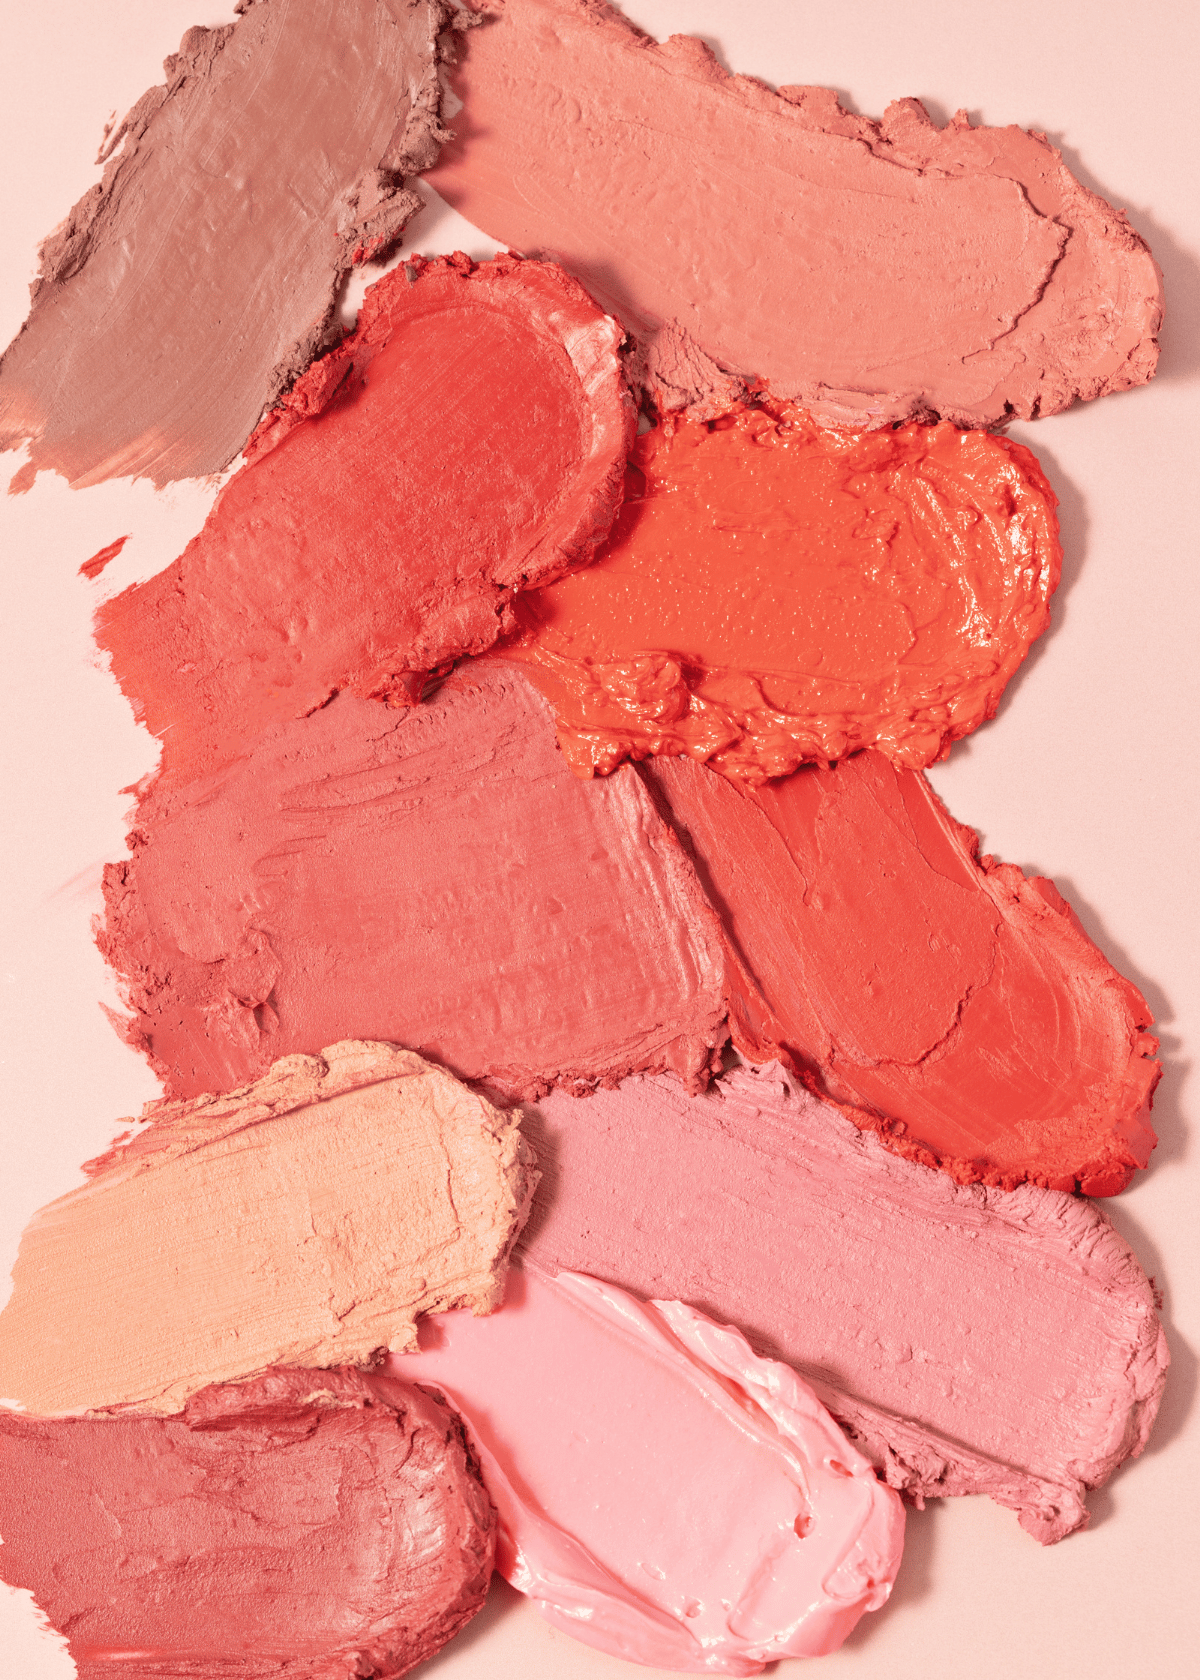 Cream Blush vs. Powder Blush: Which is Better for Your Skin?